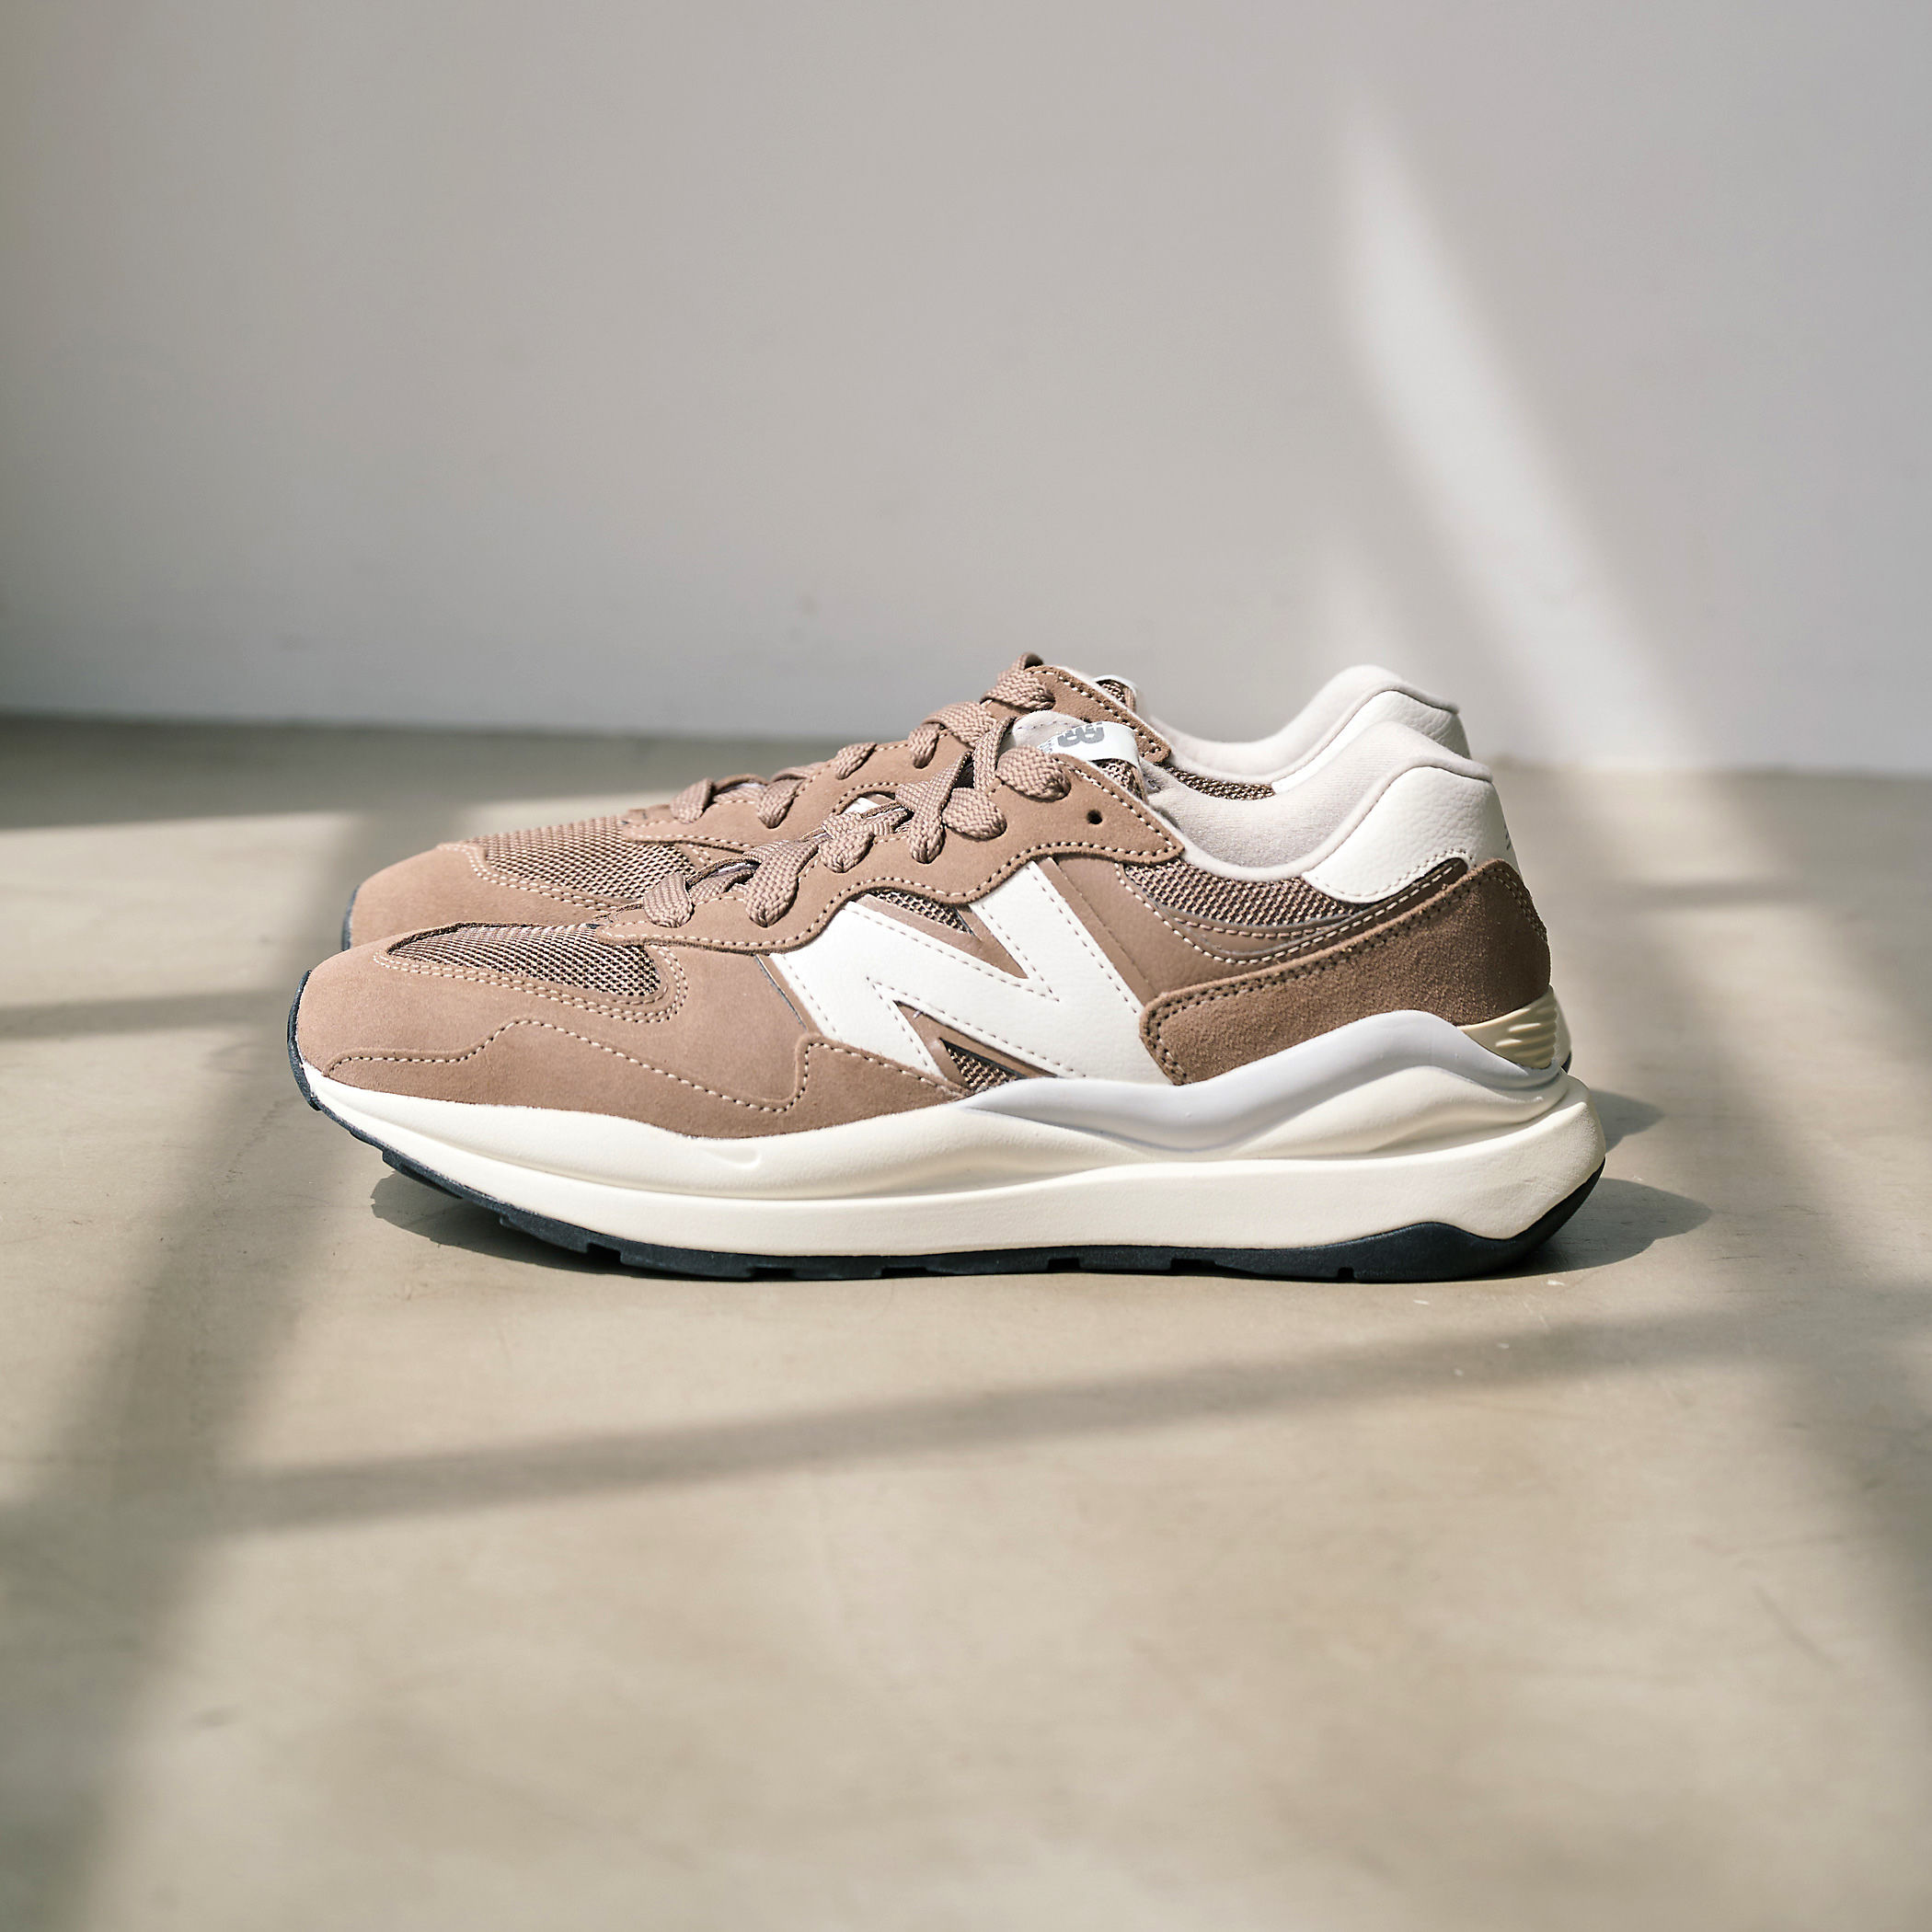 UNITED ARROWS green label relaxing
＜New Balance＞ 57/40 スニーカー / 5740
￥15,400